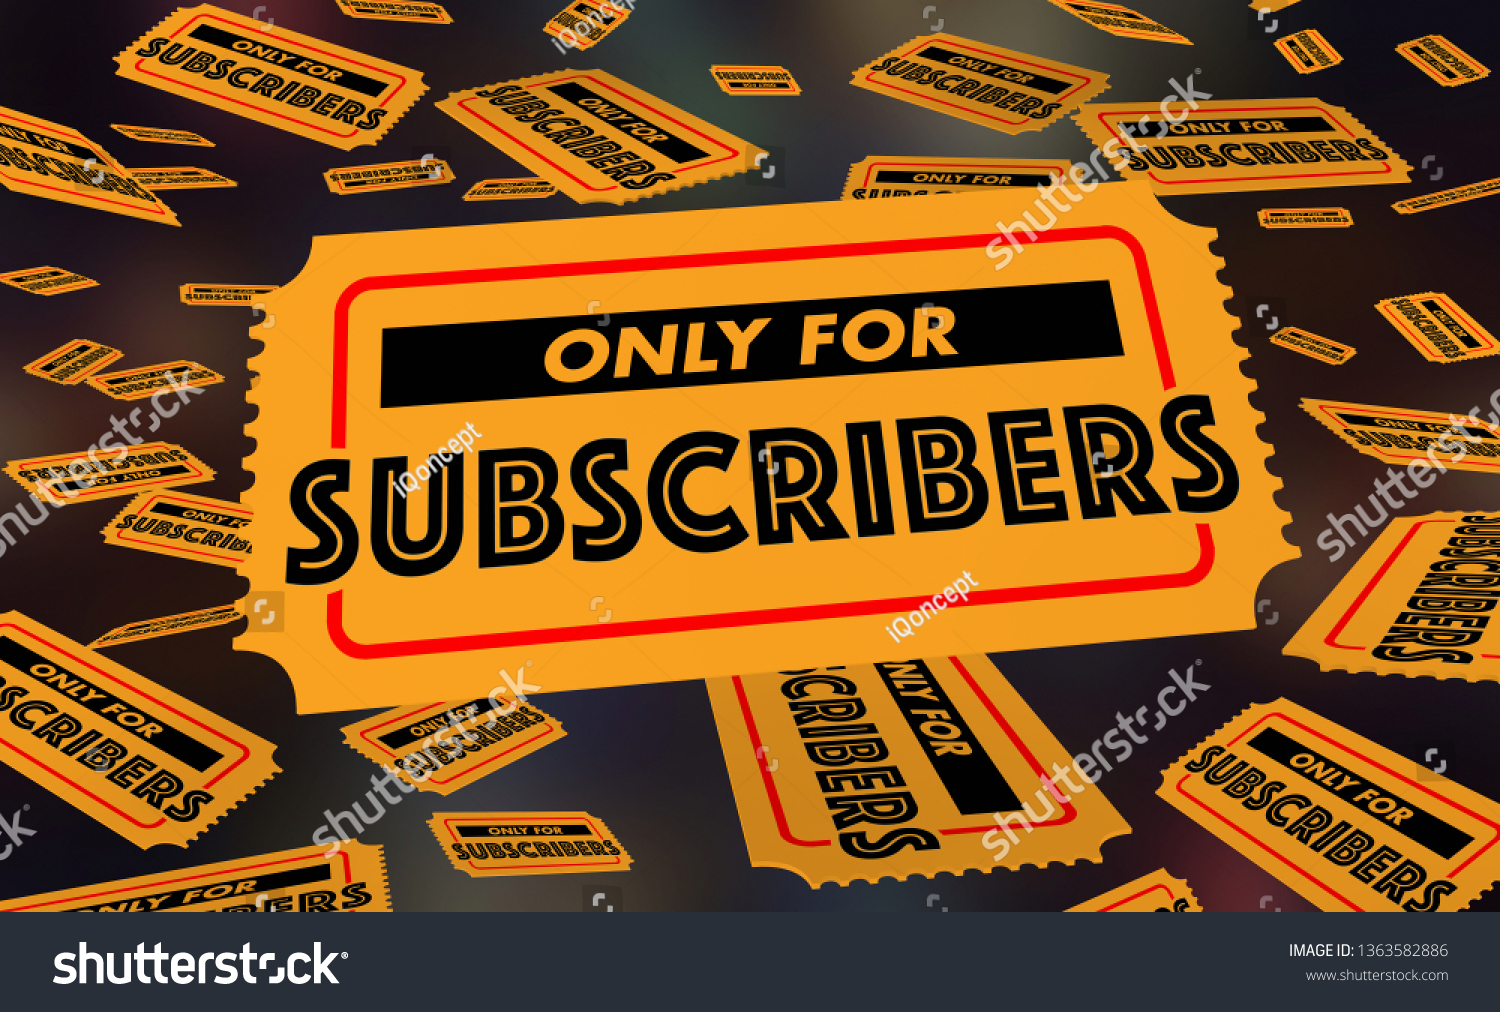 Only for Subscribers Member Benefits Tickets 3d Illustration #1363582886